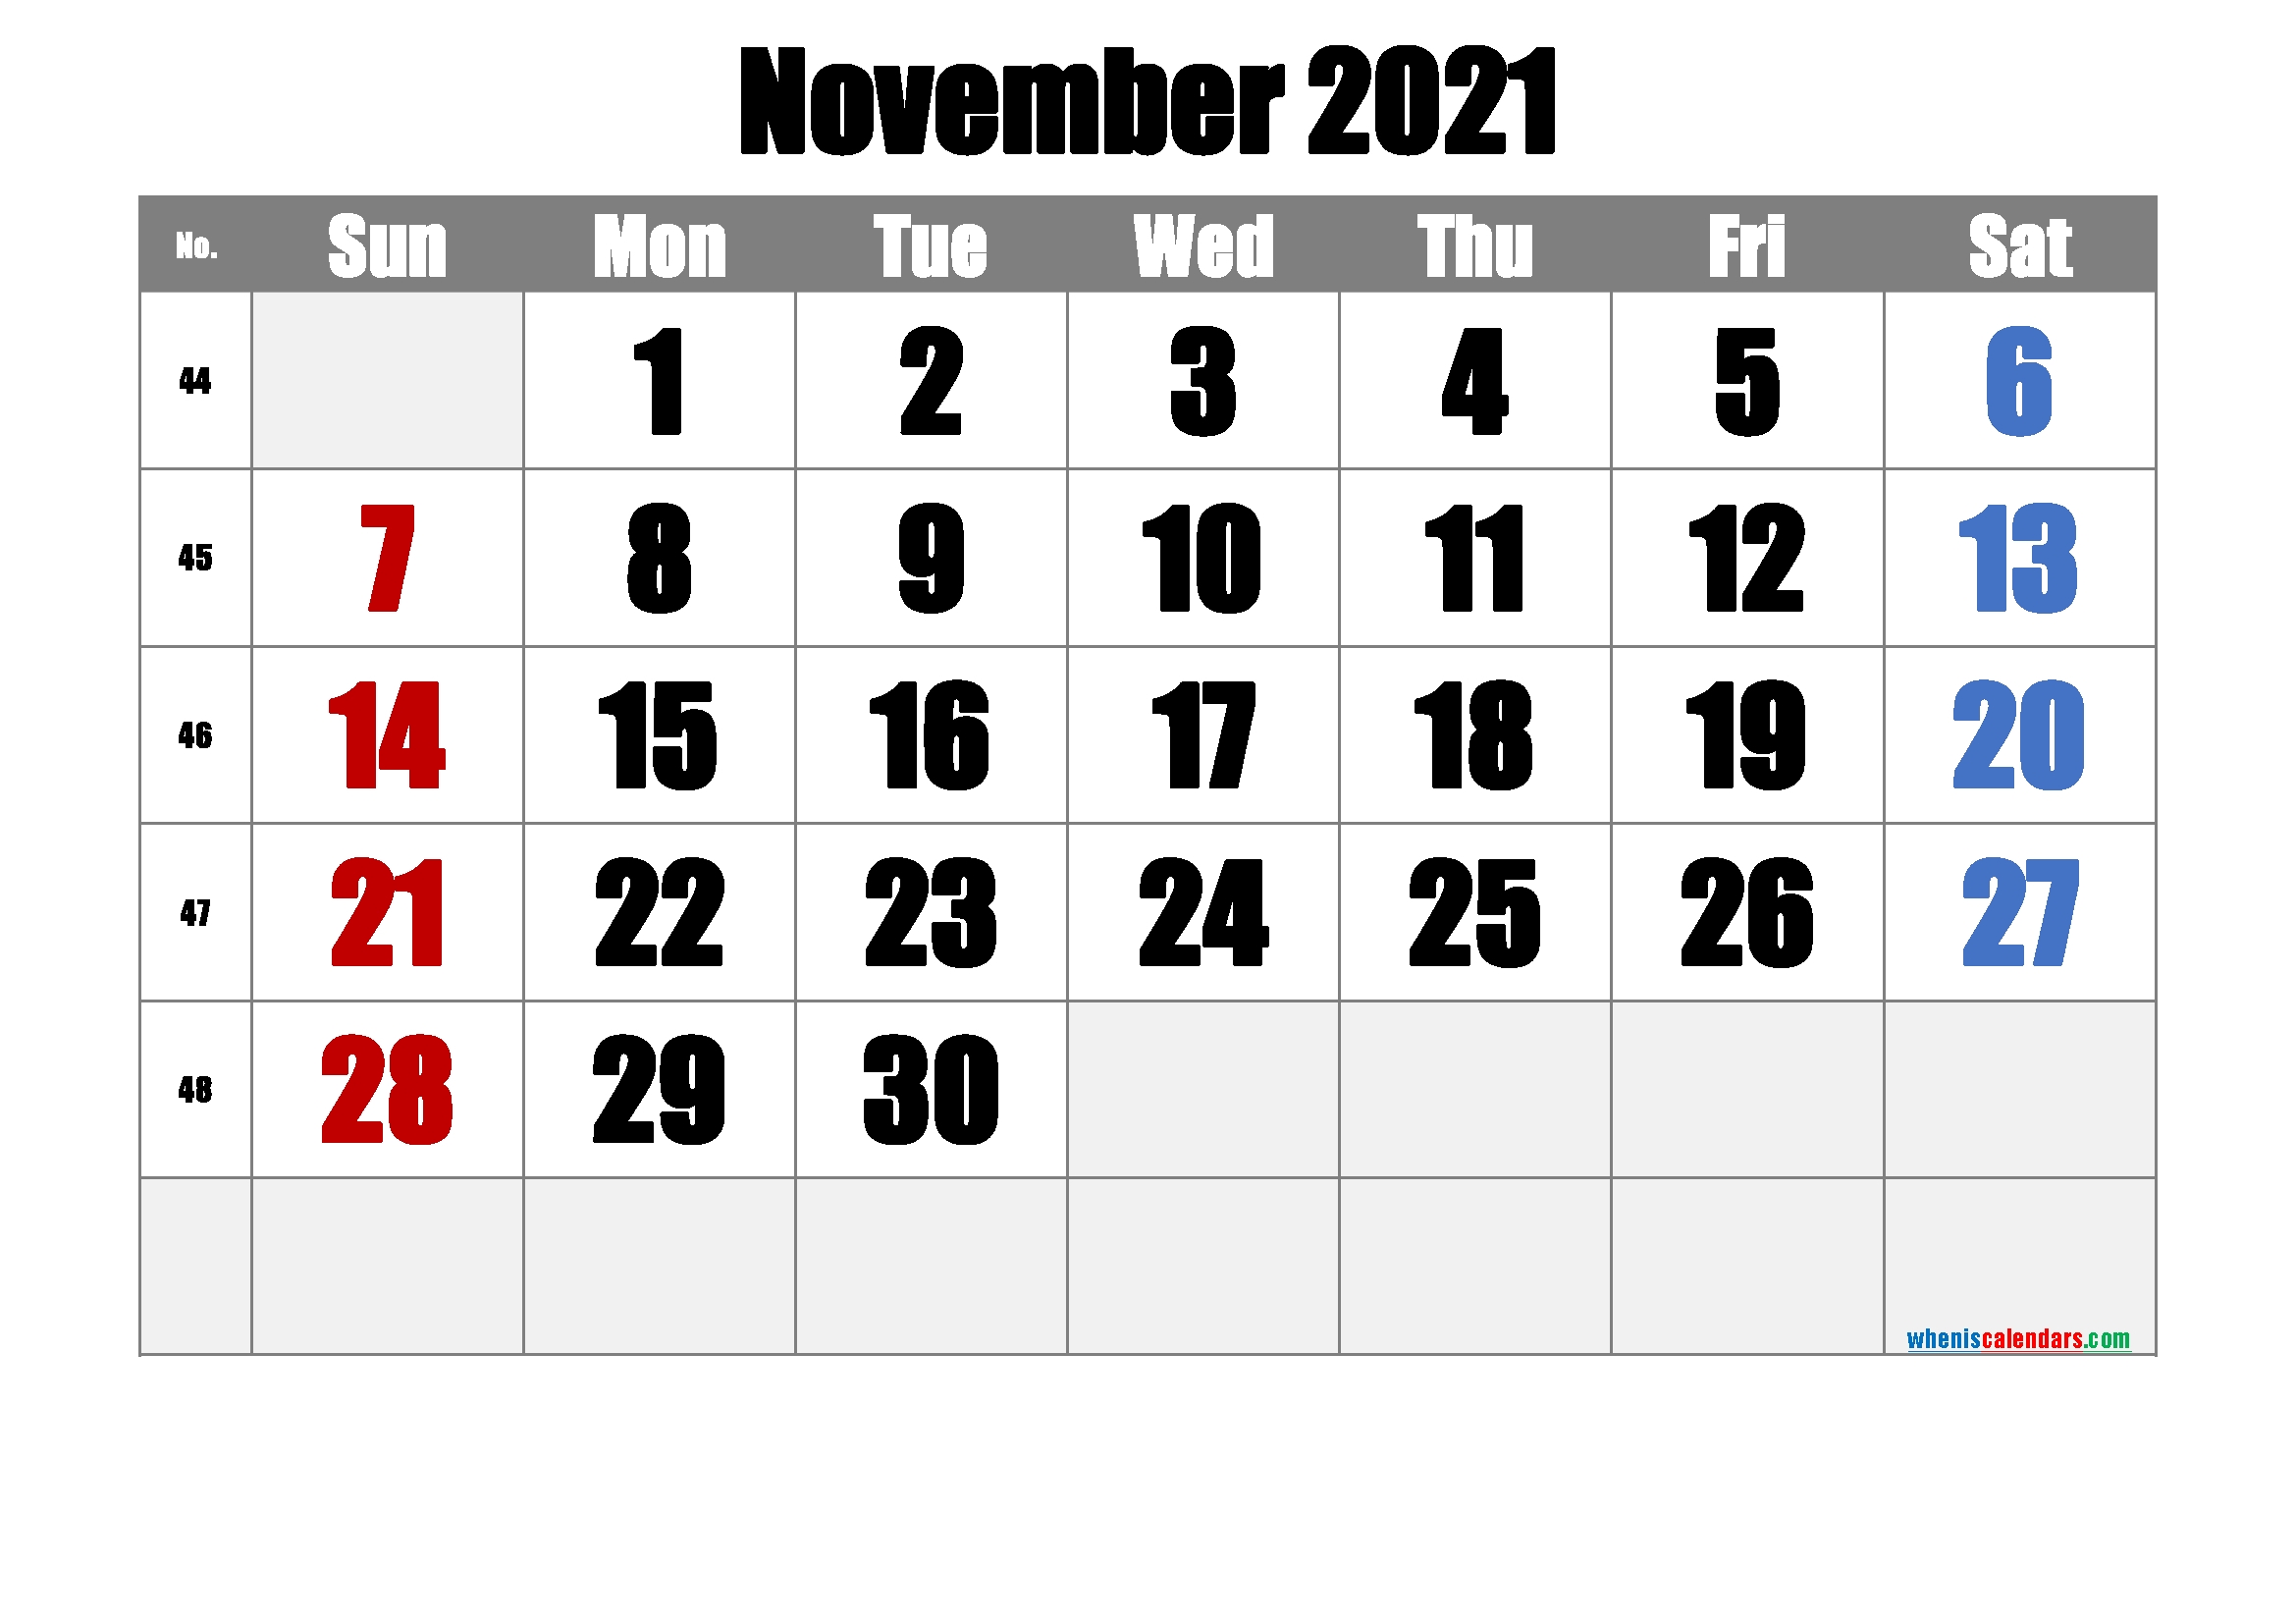 Catch Print Free November 2021 Calendar Without Downloading